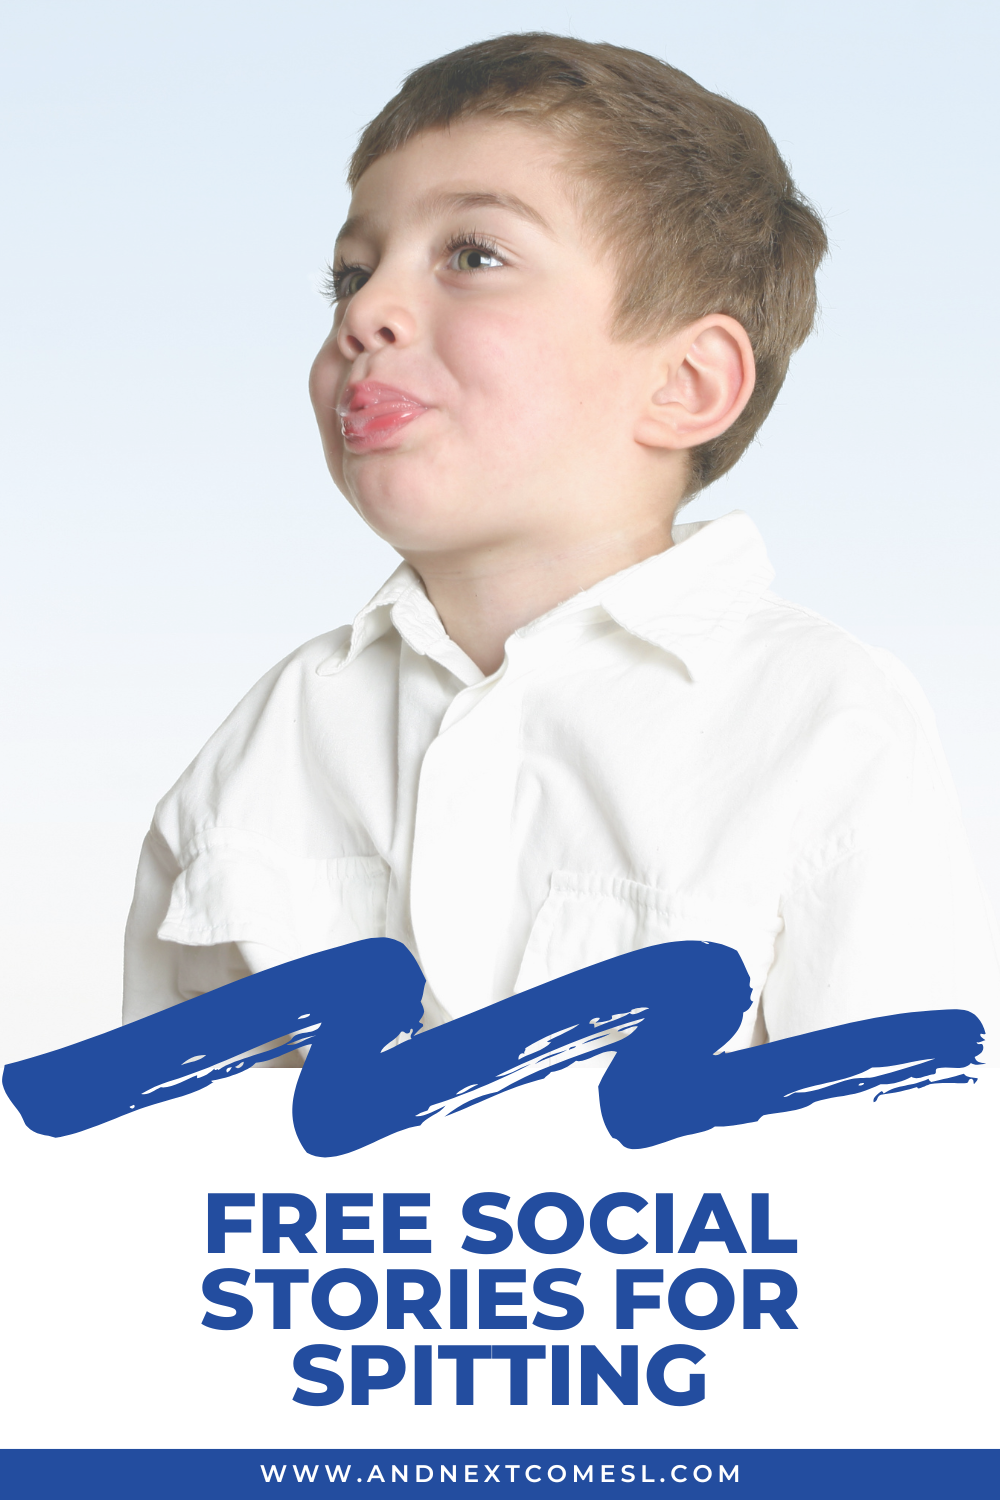 Free social stories for spitting